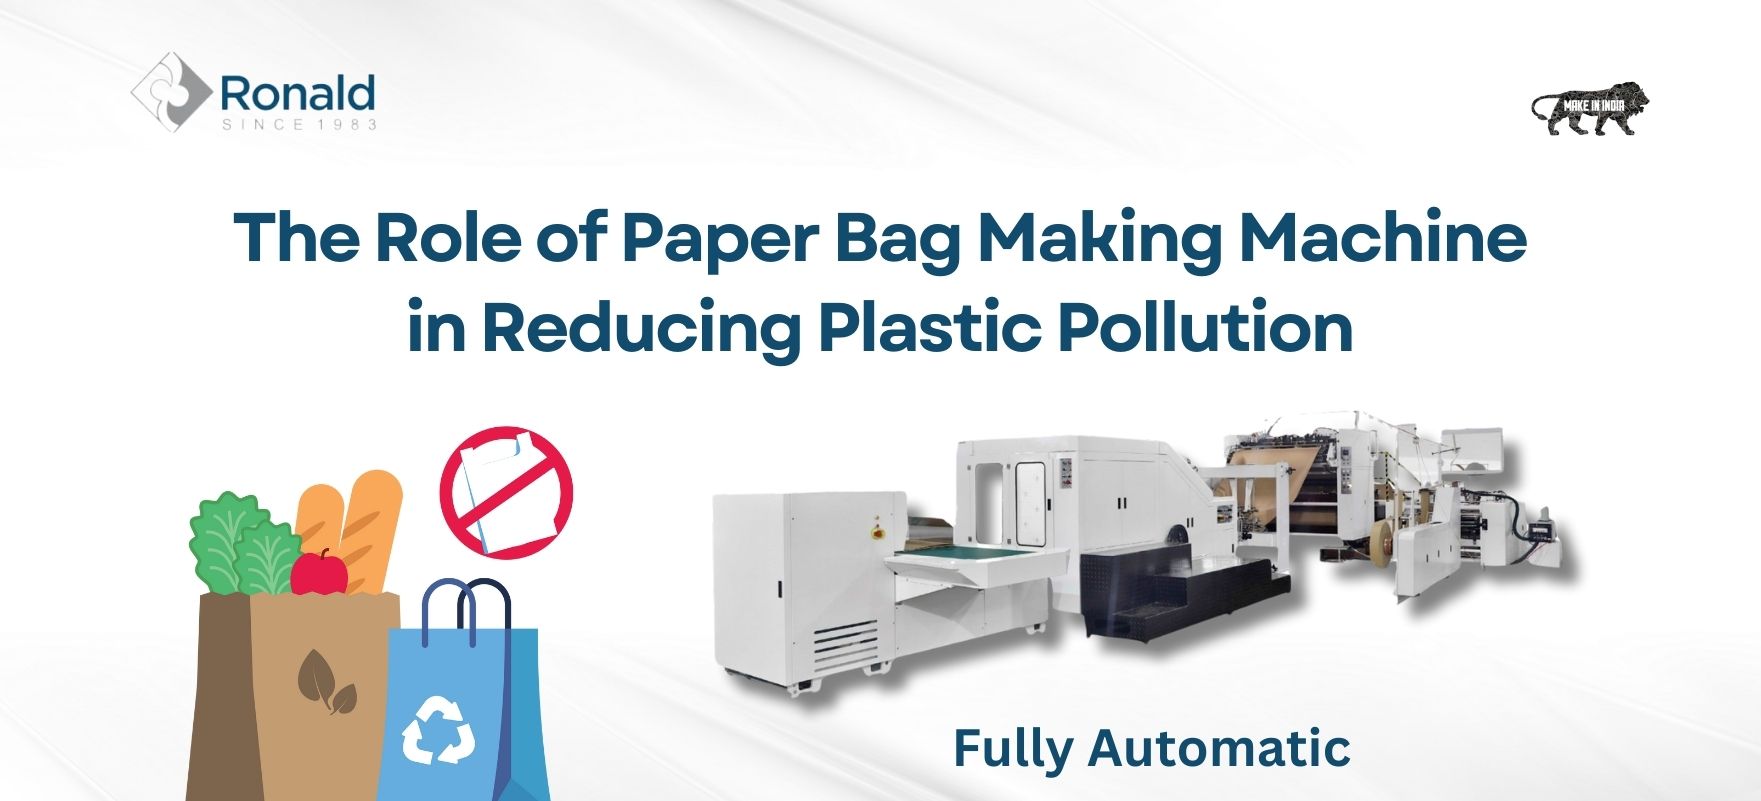 The Role of Paper Bag Making Machine in Reducing Plastic Pollution